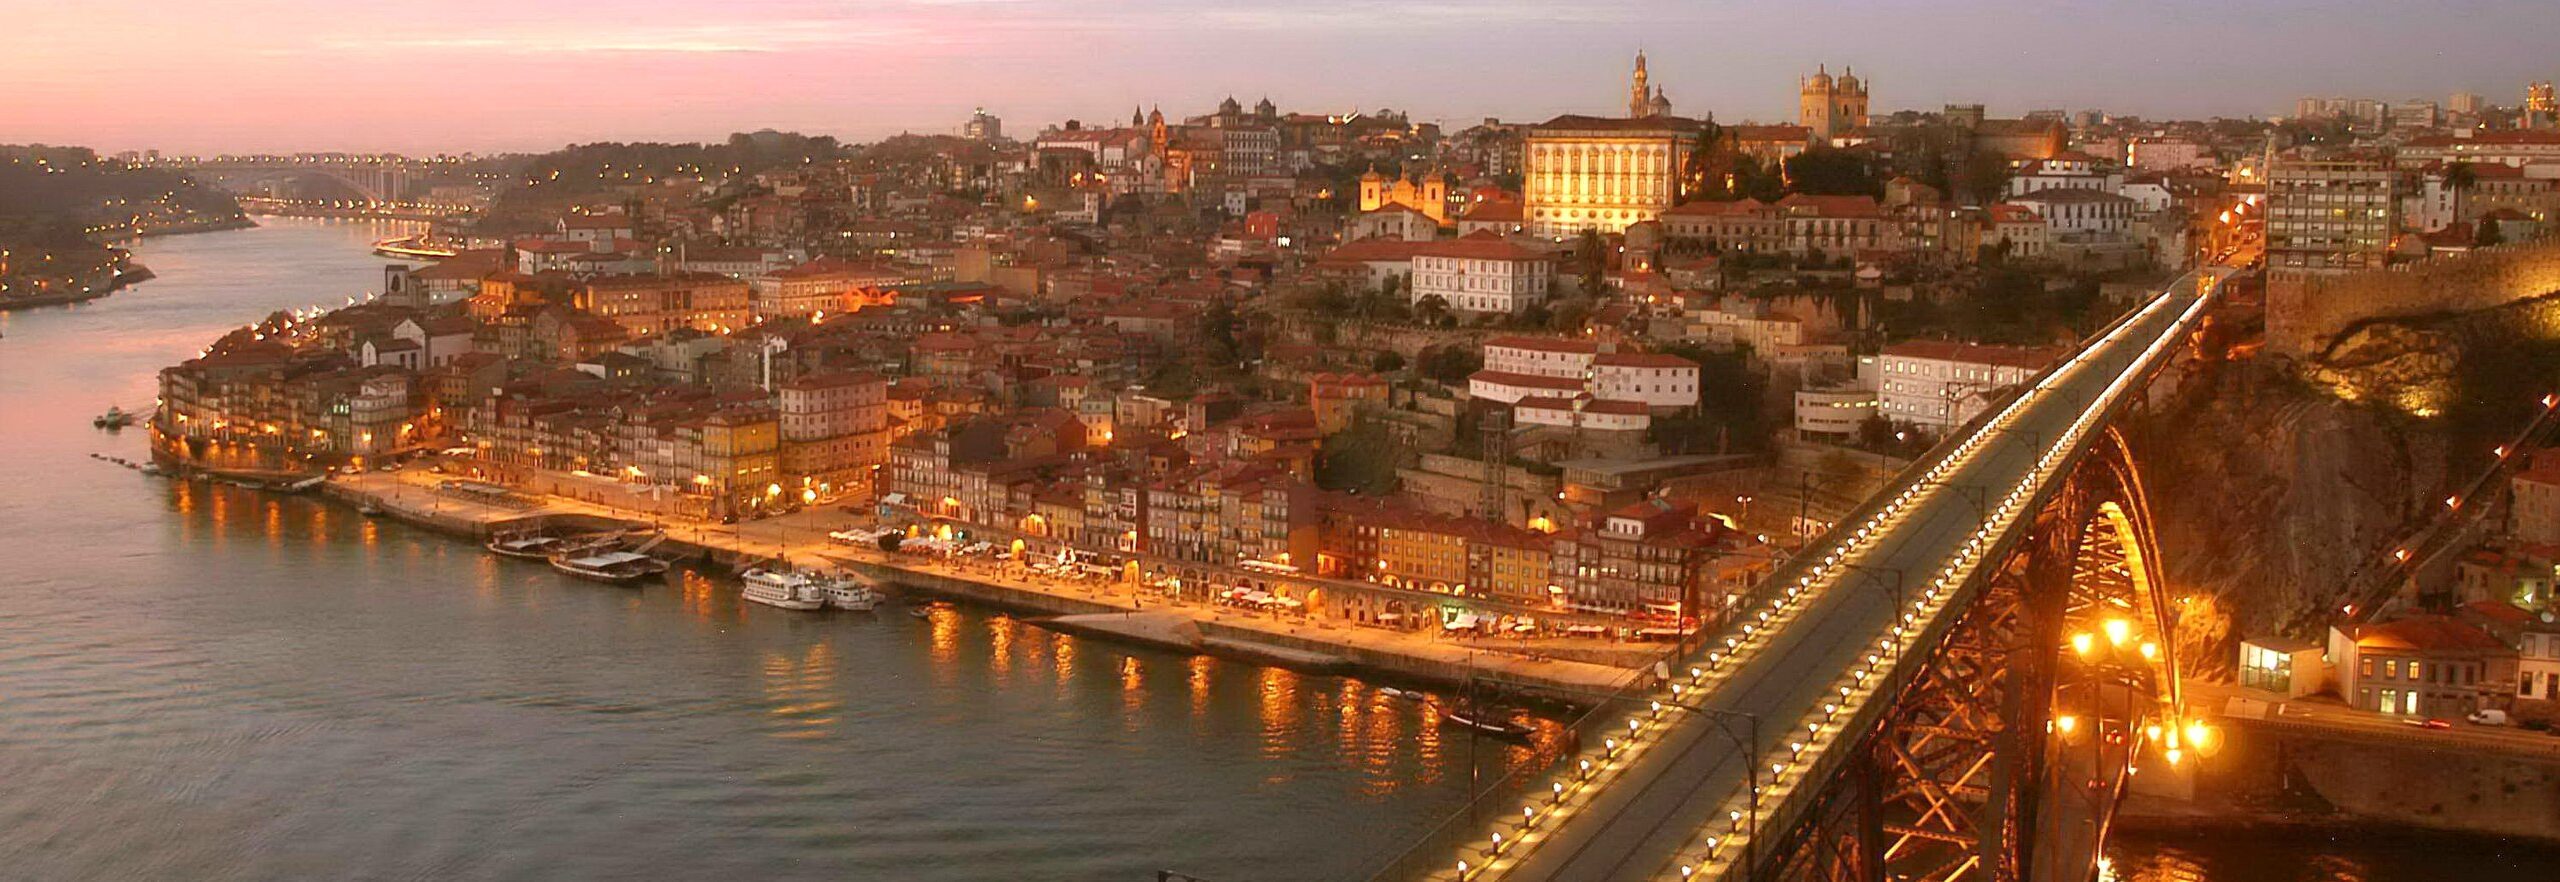 Porto at night - this guided bike tour of Portugal ends in Porto